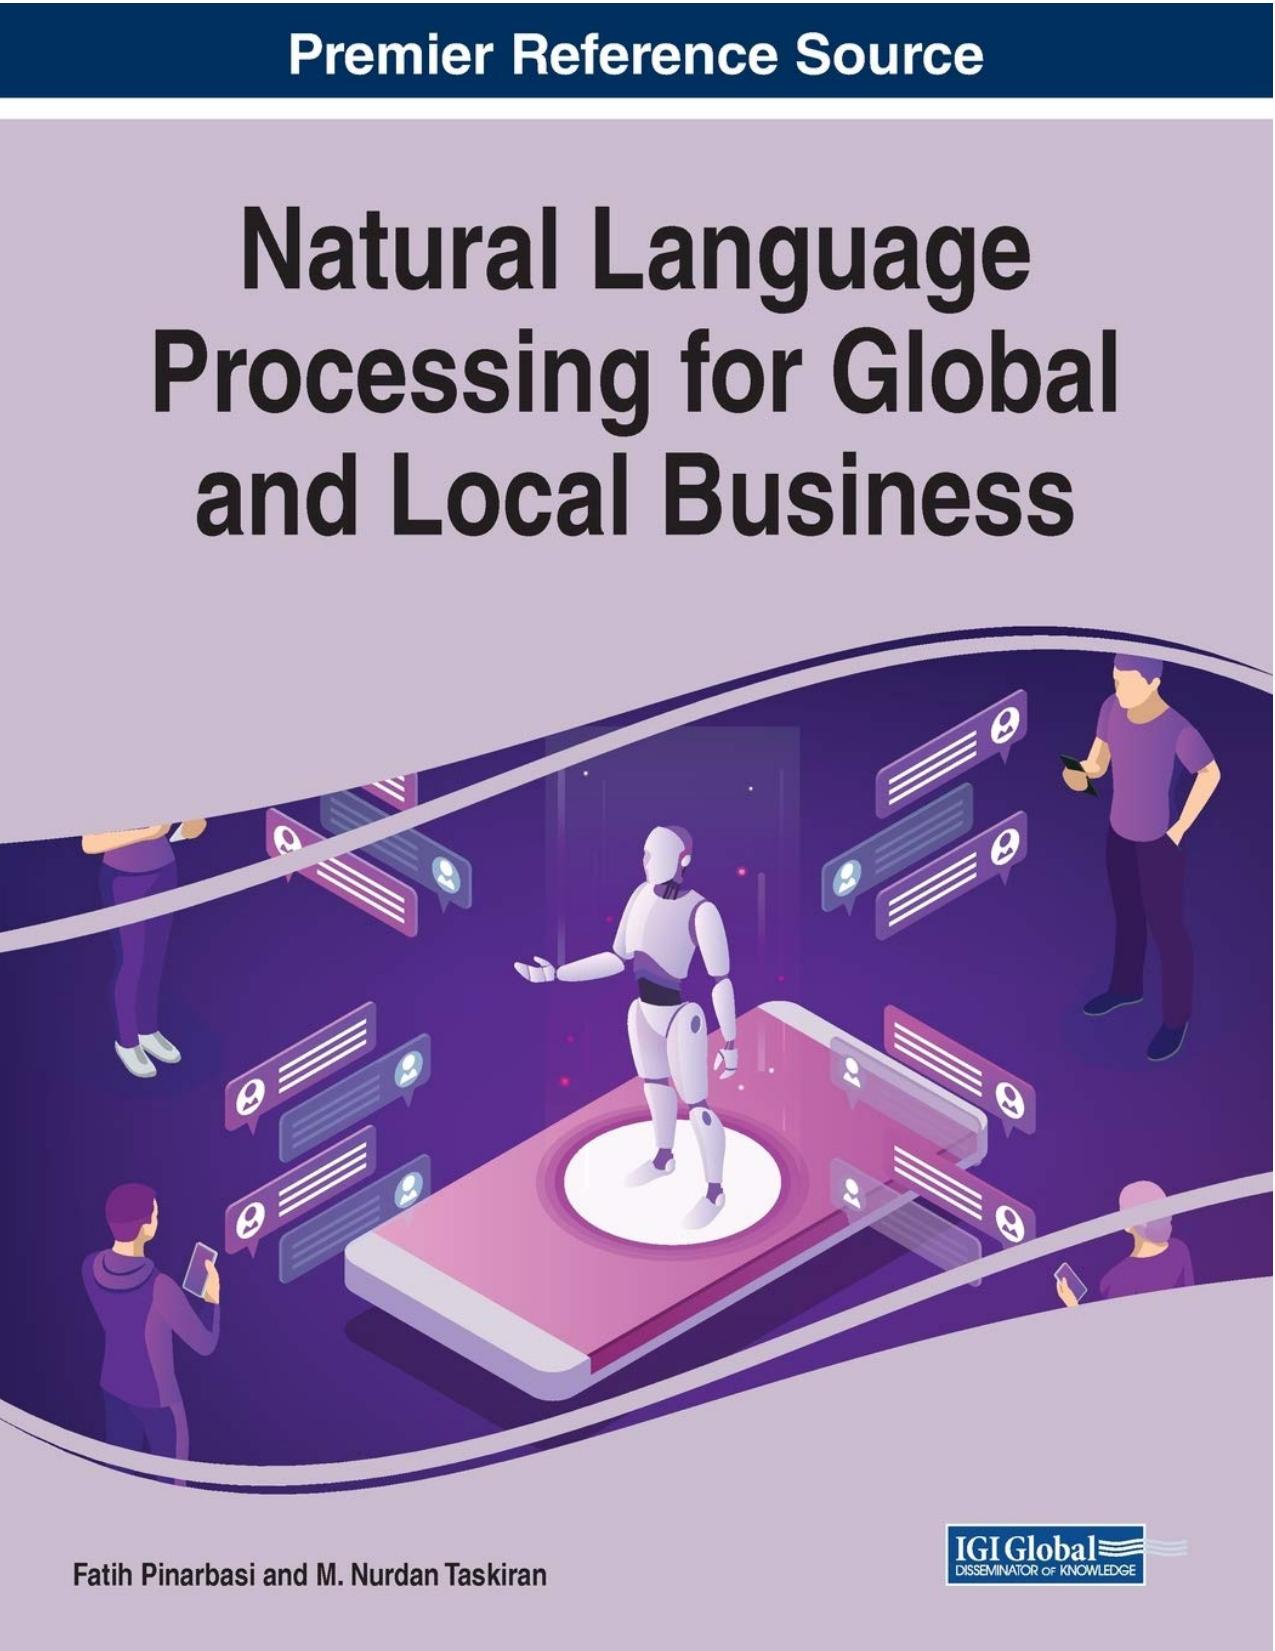 Natural Language Processing for Global and Local Business